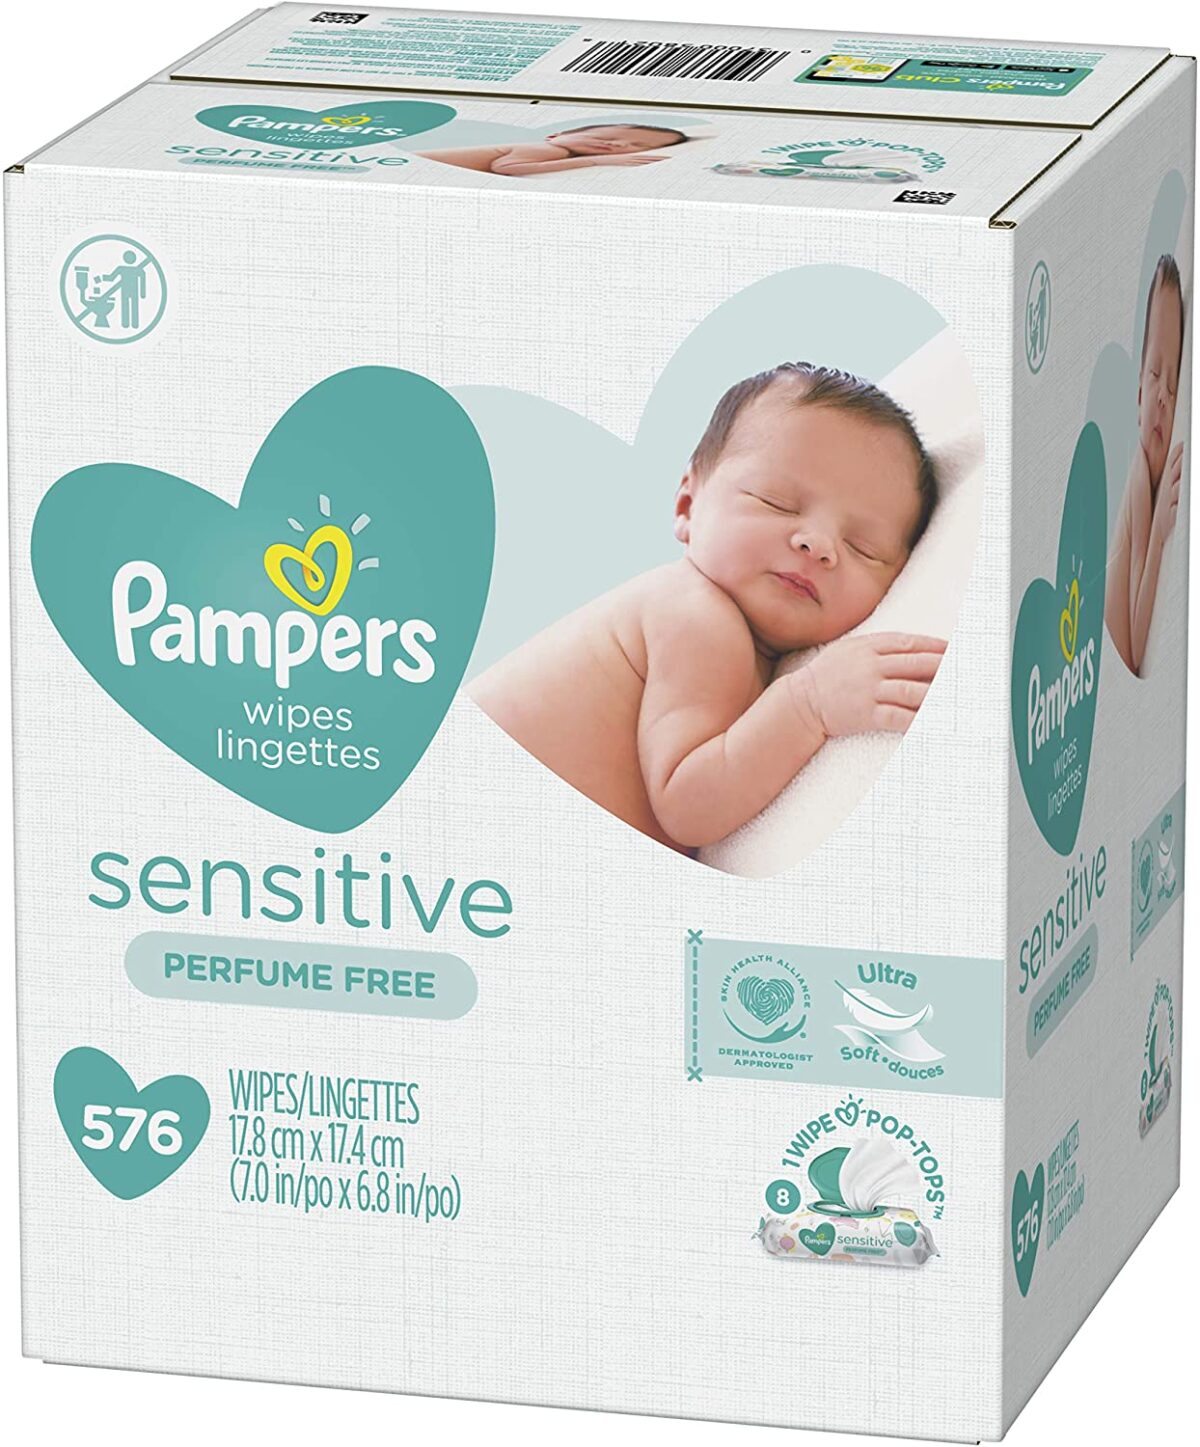 Baby Wipes, Pampers Sensitive Water Based Baby Diaper Wipes, Hypoallergenic and Unscented, 8 Pop-Top Packs, 576 Total Wipes